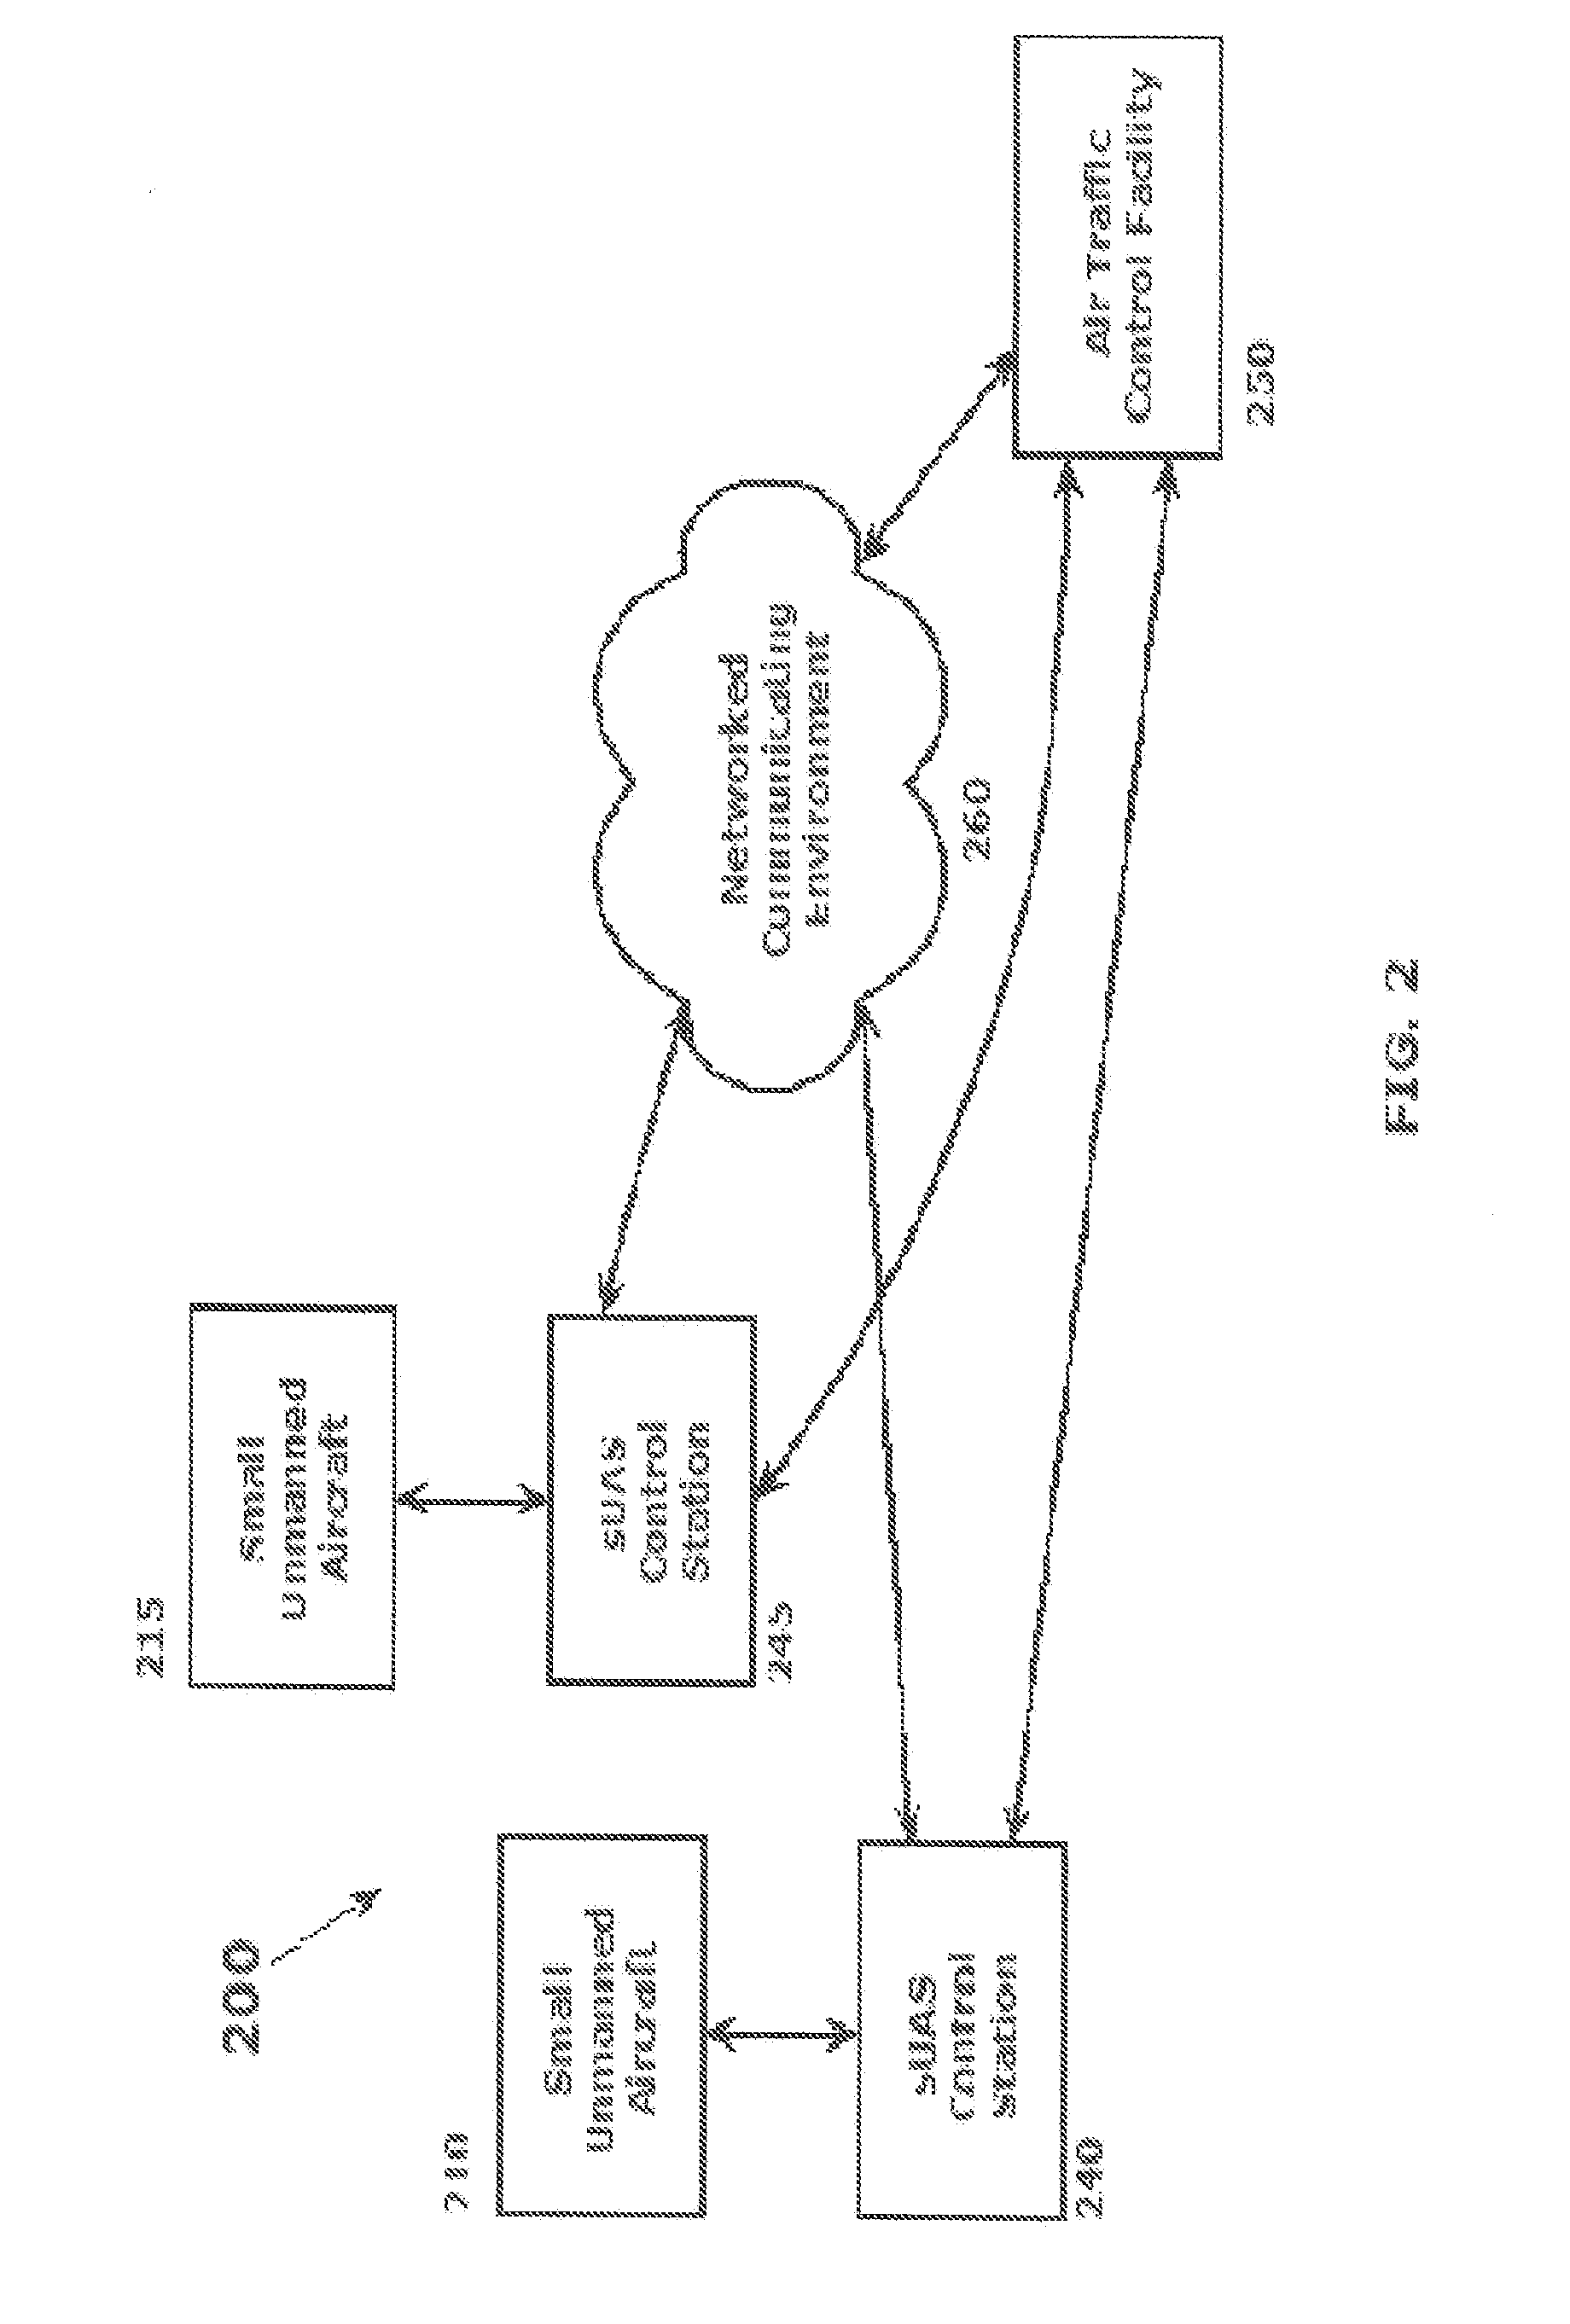 SYSTEMS AND METHODS FOR REAL-TIME DATA COMMUNICATIONS AND MESSAGING WITH OPERATORS OF SMALL UNMANNED AIRCRAFT SYSTEMS (sUAS)